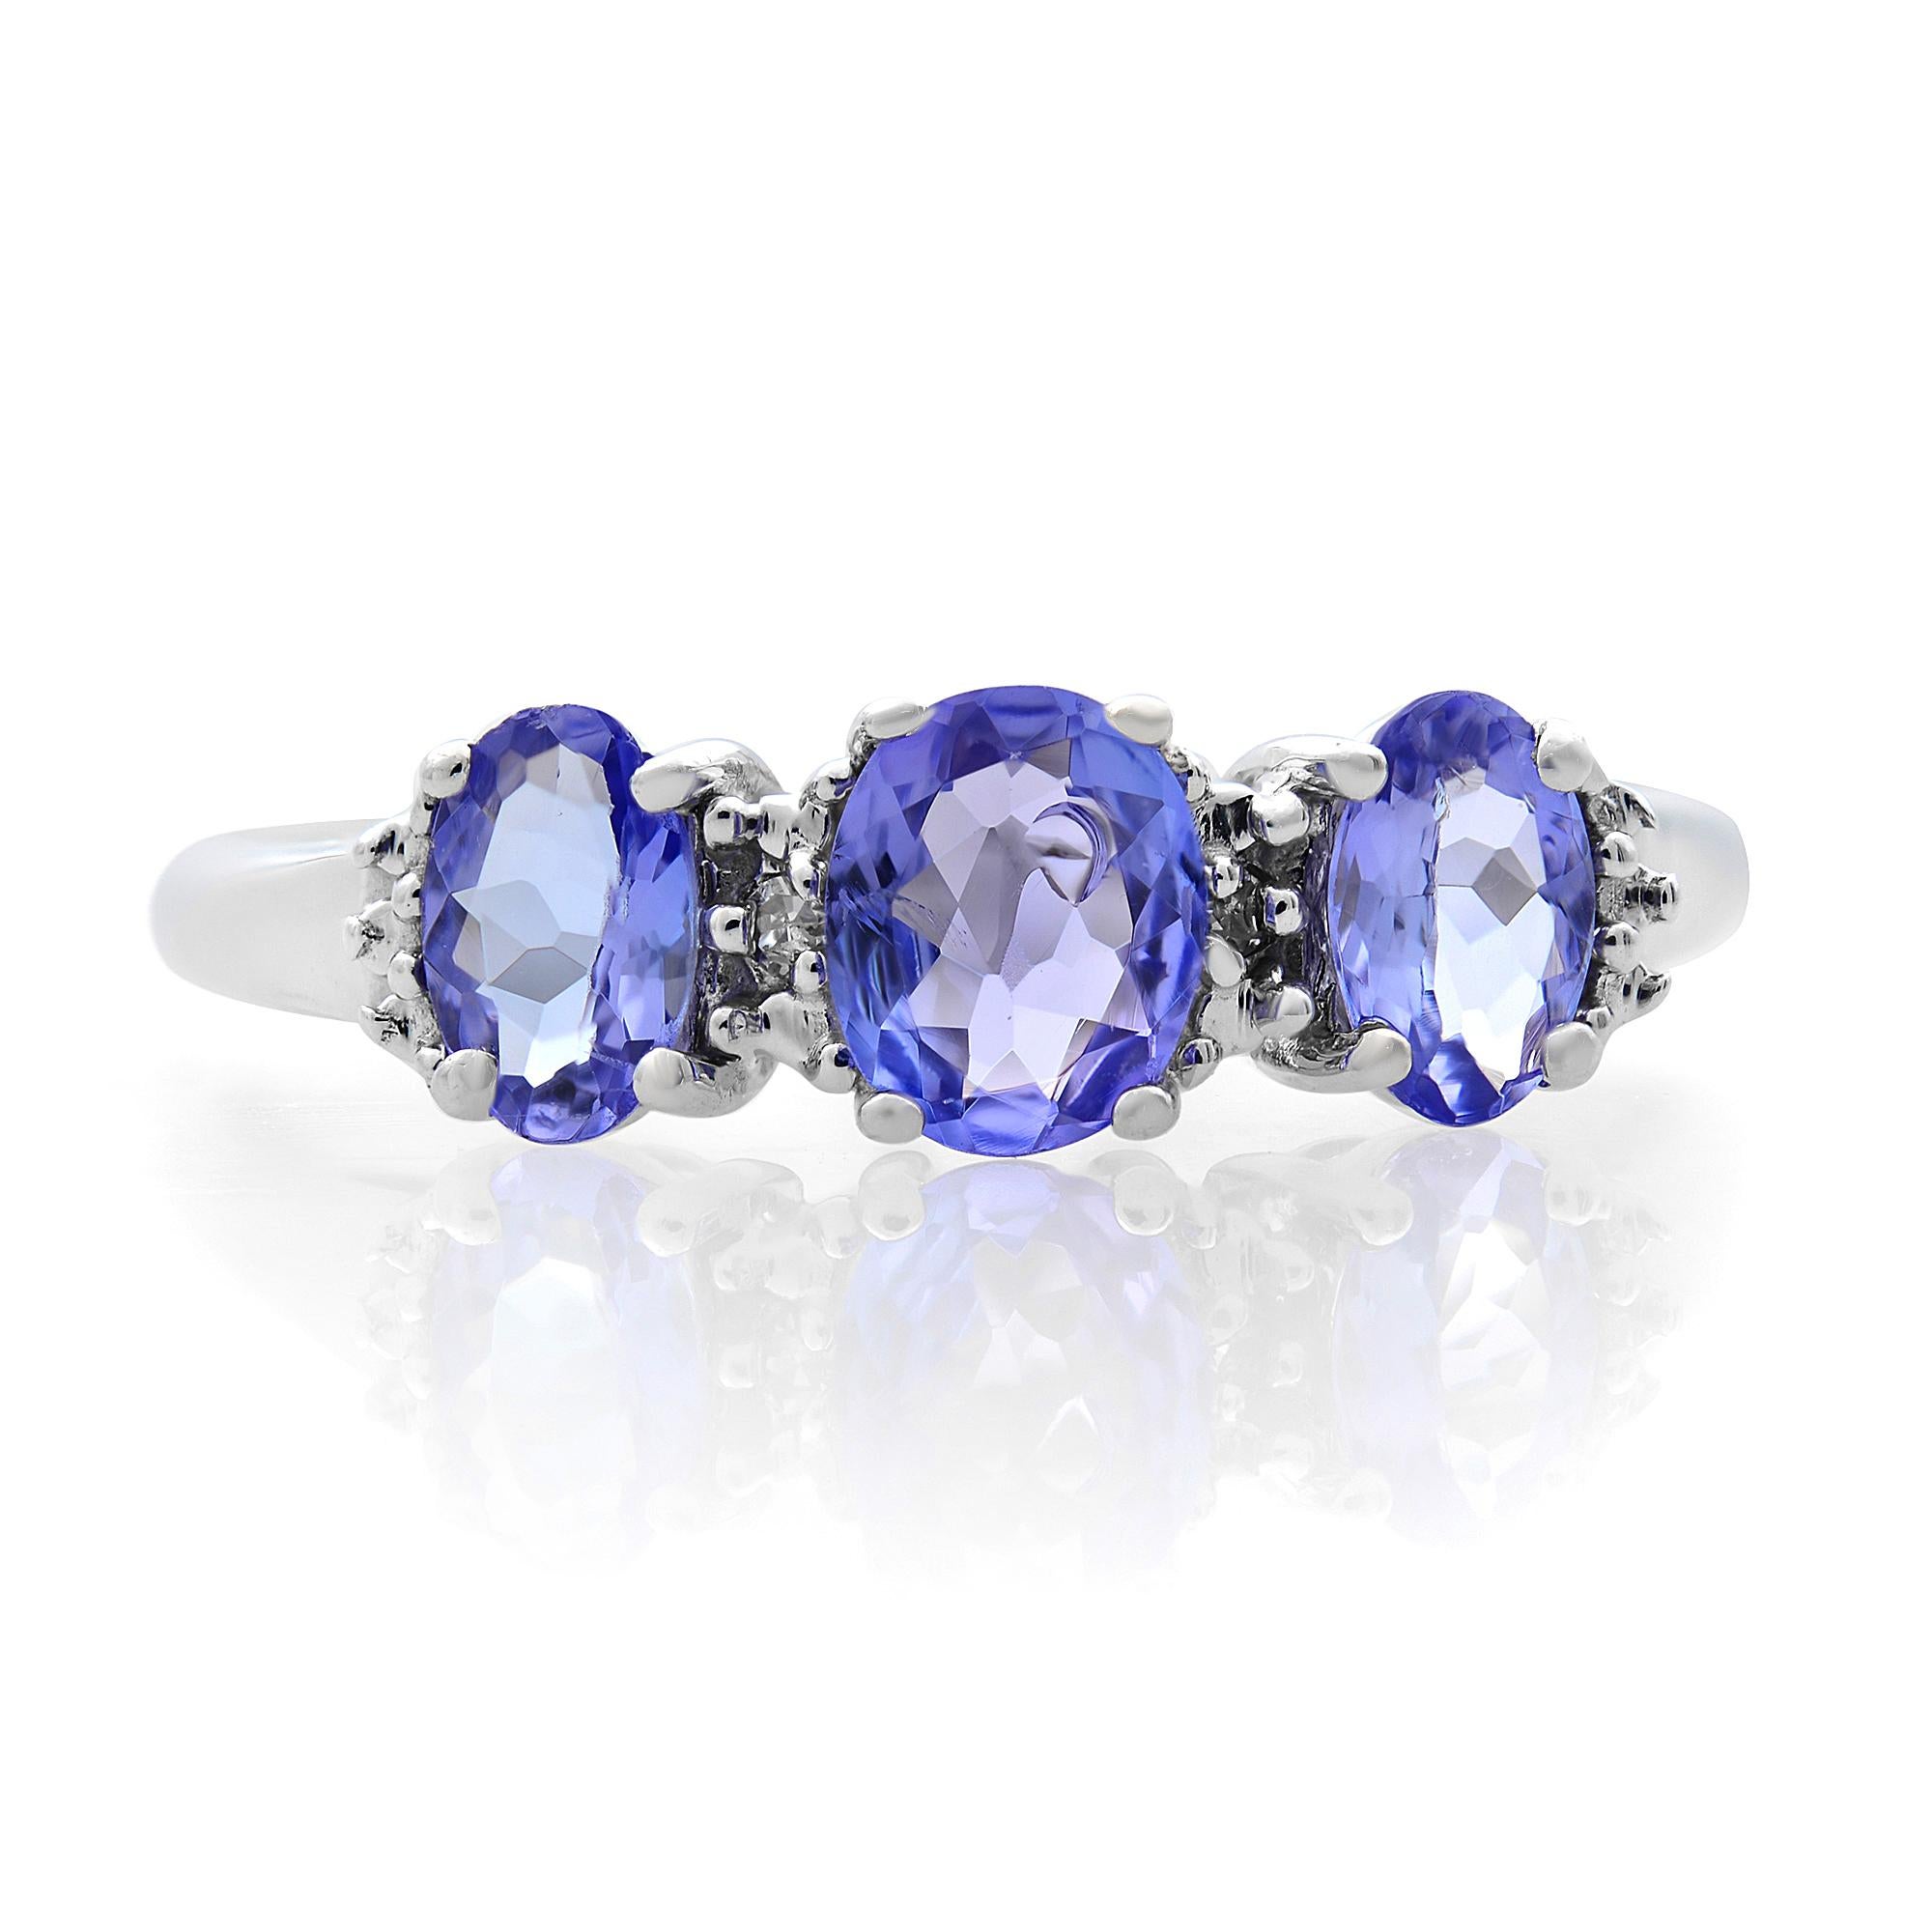 Charm your leading lady with this vibrant gemstone ring. Crafted in 14K white gold, this lovely look showcases a 5.0 x 4.0mm oval-shaped violet-purple tanzanite at the center, flanked by a duo of 4.7 x 3.0mm tanzanites. A pair of shimmering diamond